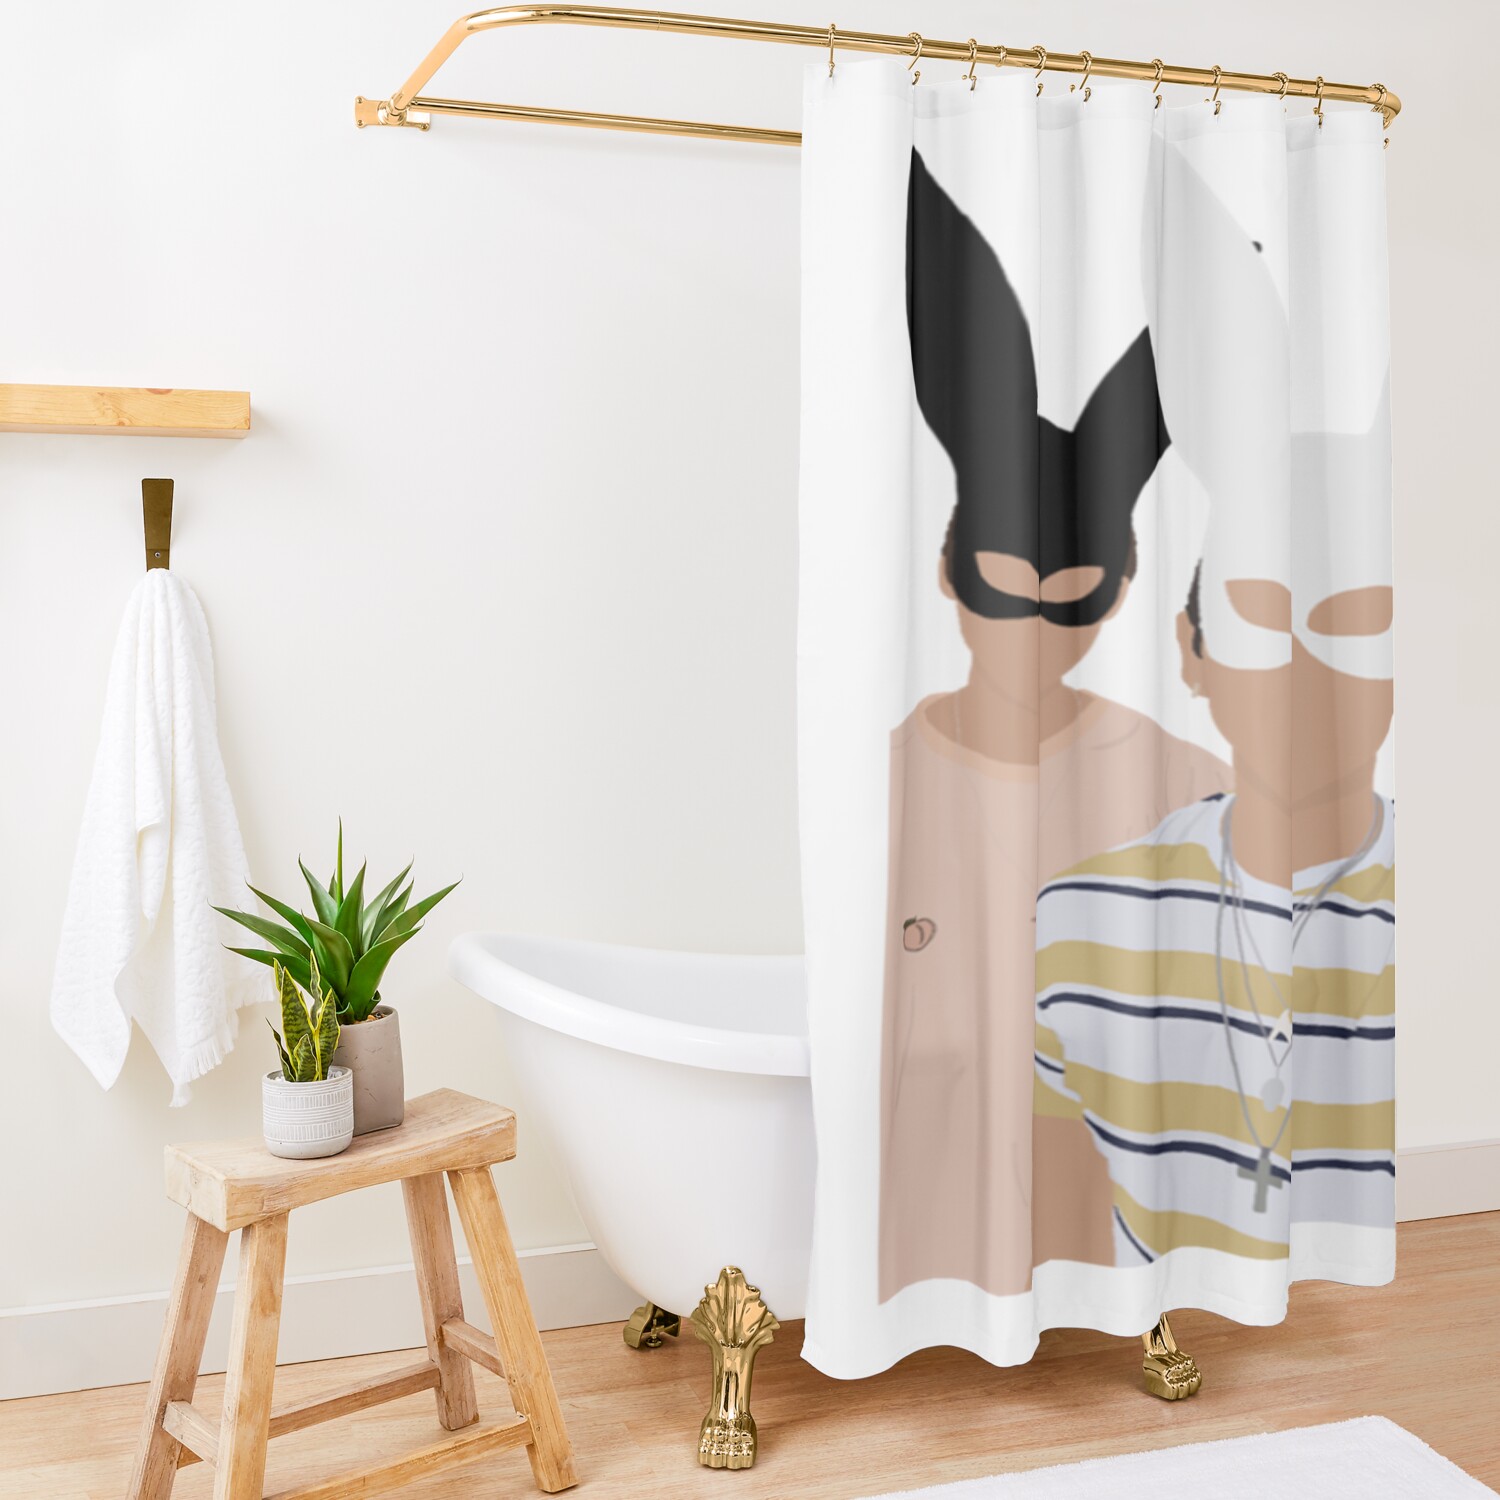 urshower curtain opensquare1500x1500 3 - Sam And Colby Shop